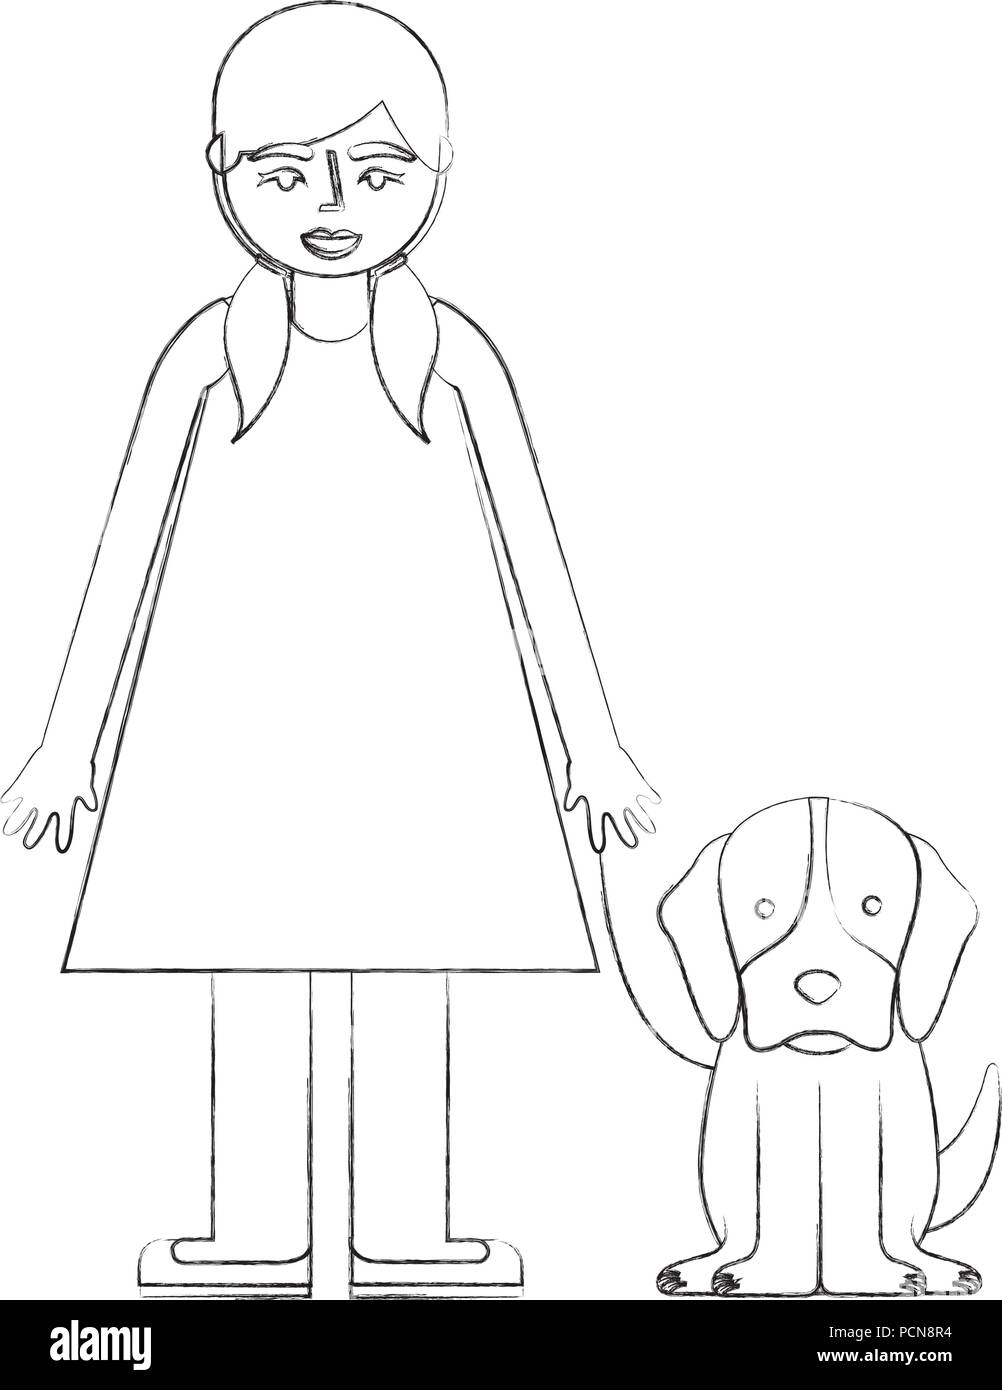 little girl with pet dog vector illustration hand drawing Stock ...